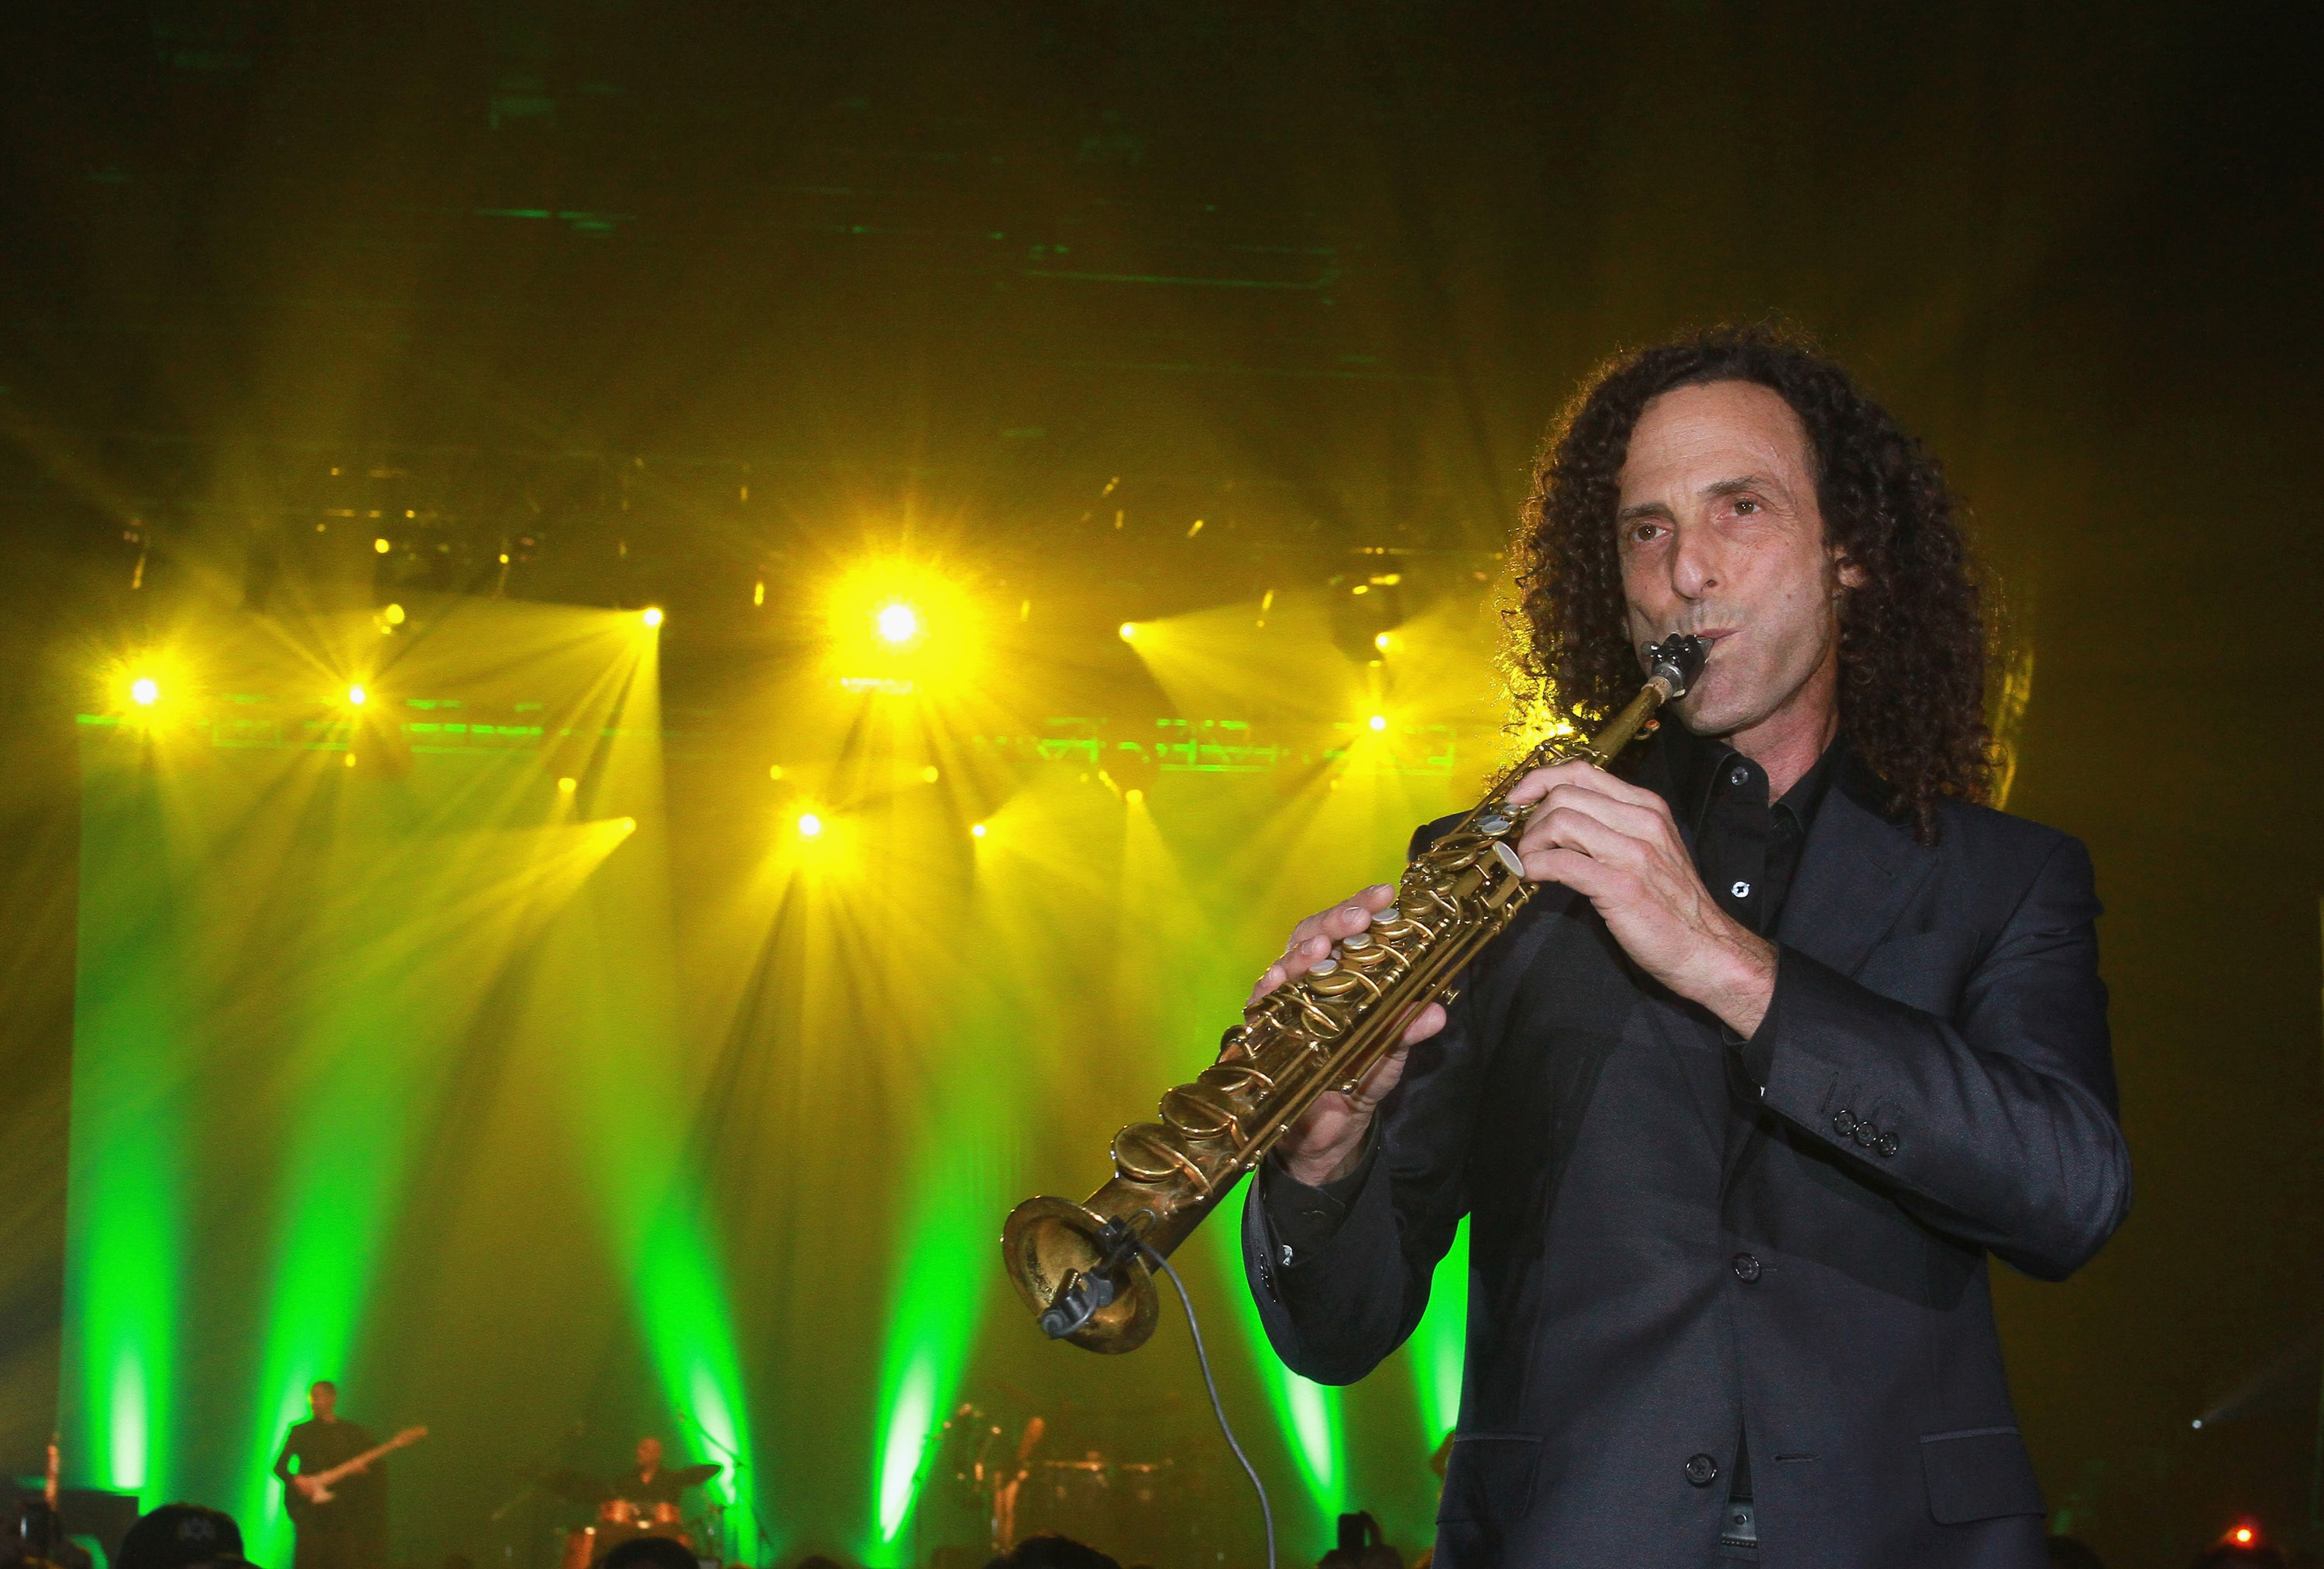 American musician Kenny G performs on stage during his concert at Hong Kong International Trade and Exhibition Centre on May 17, 2011 in Hong Kong. (ChinaFotoPress/Getty Images)